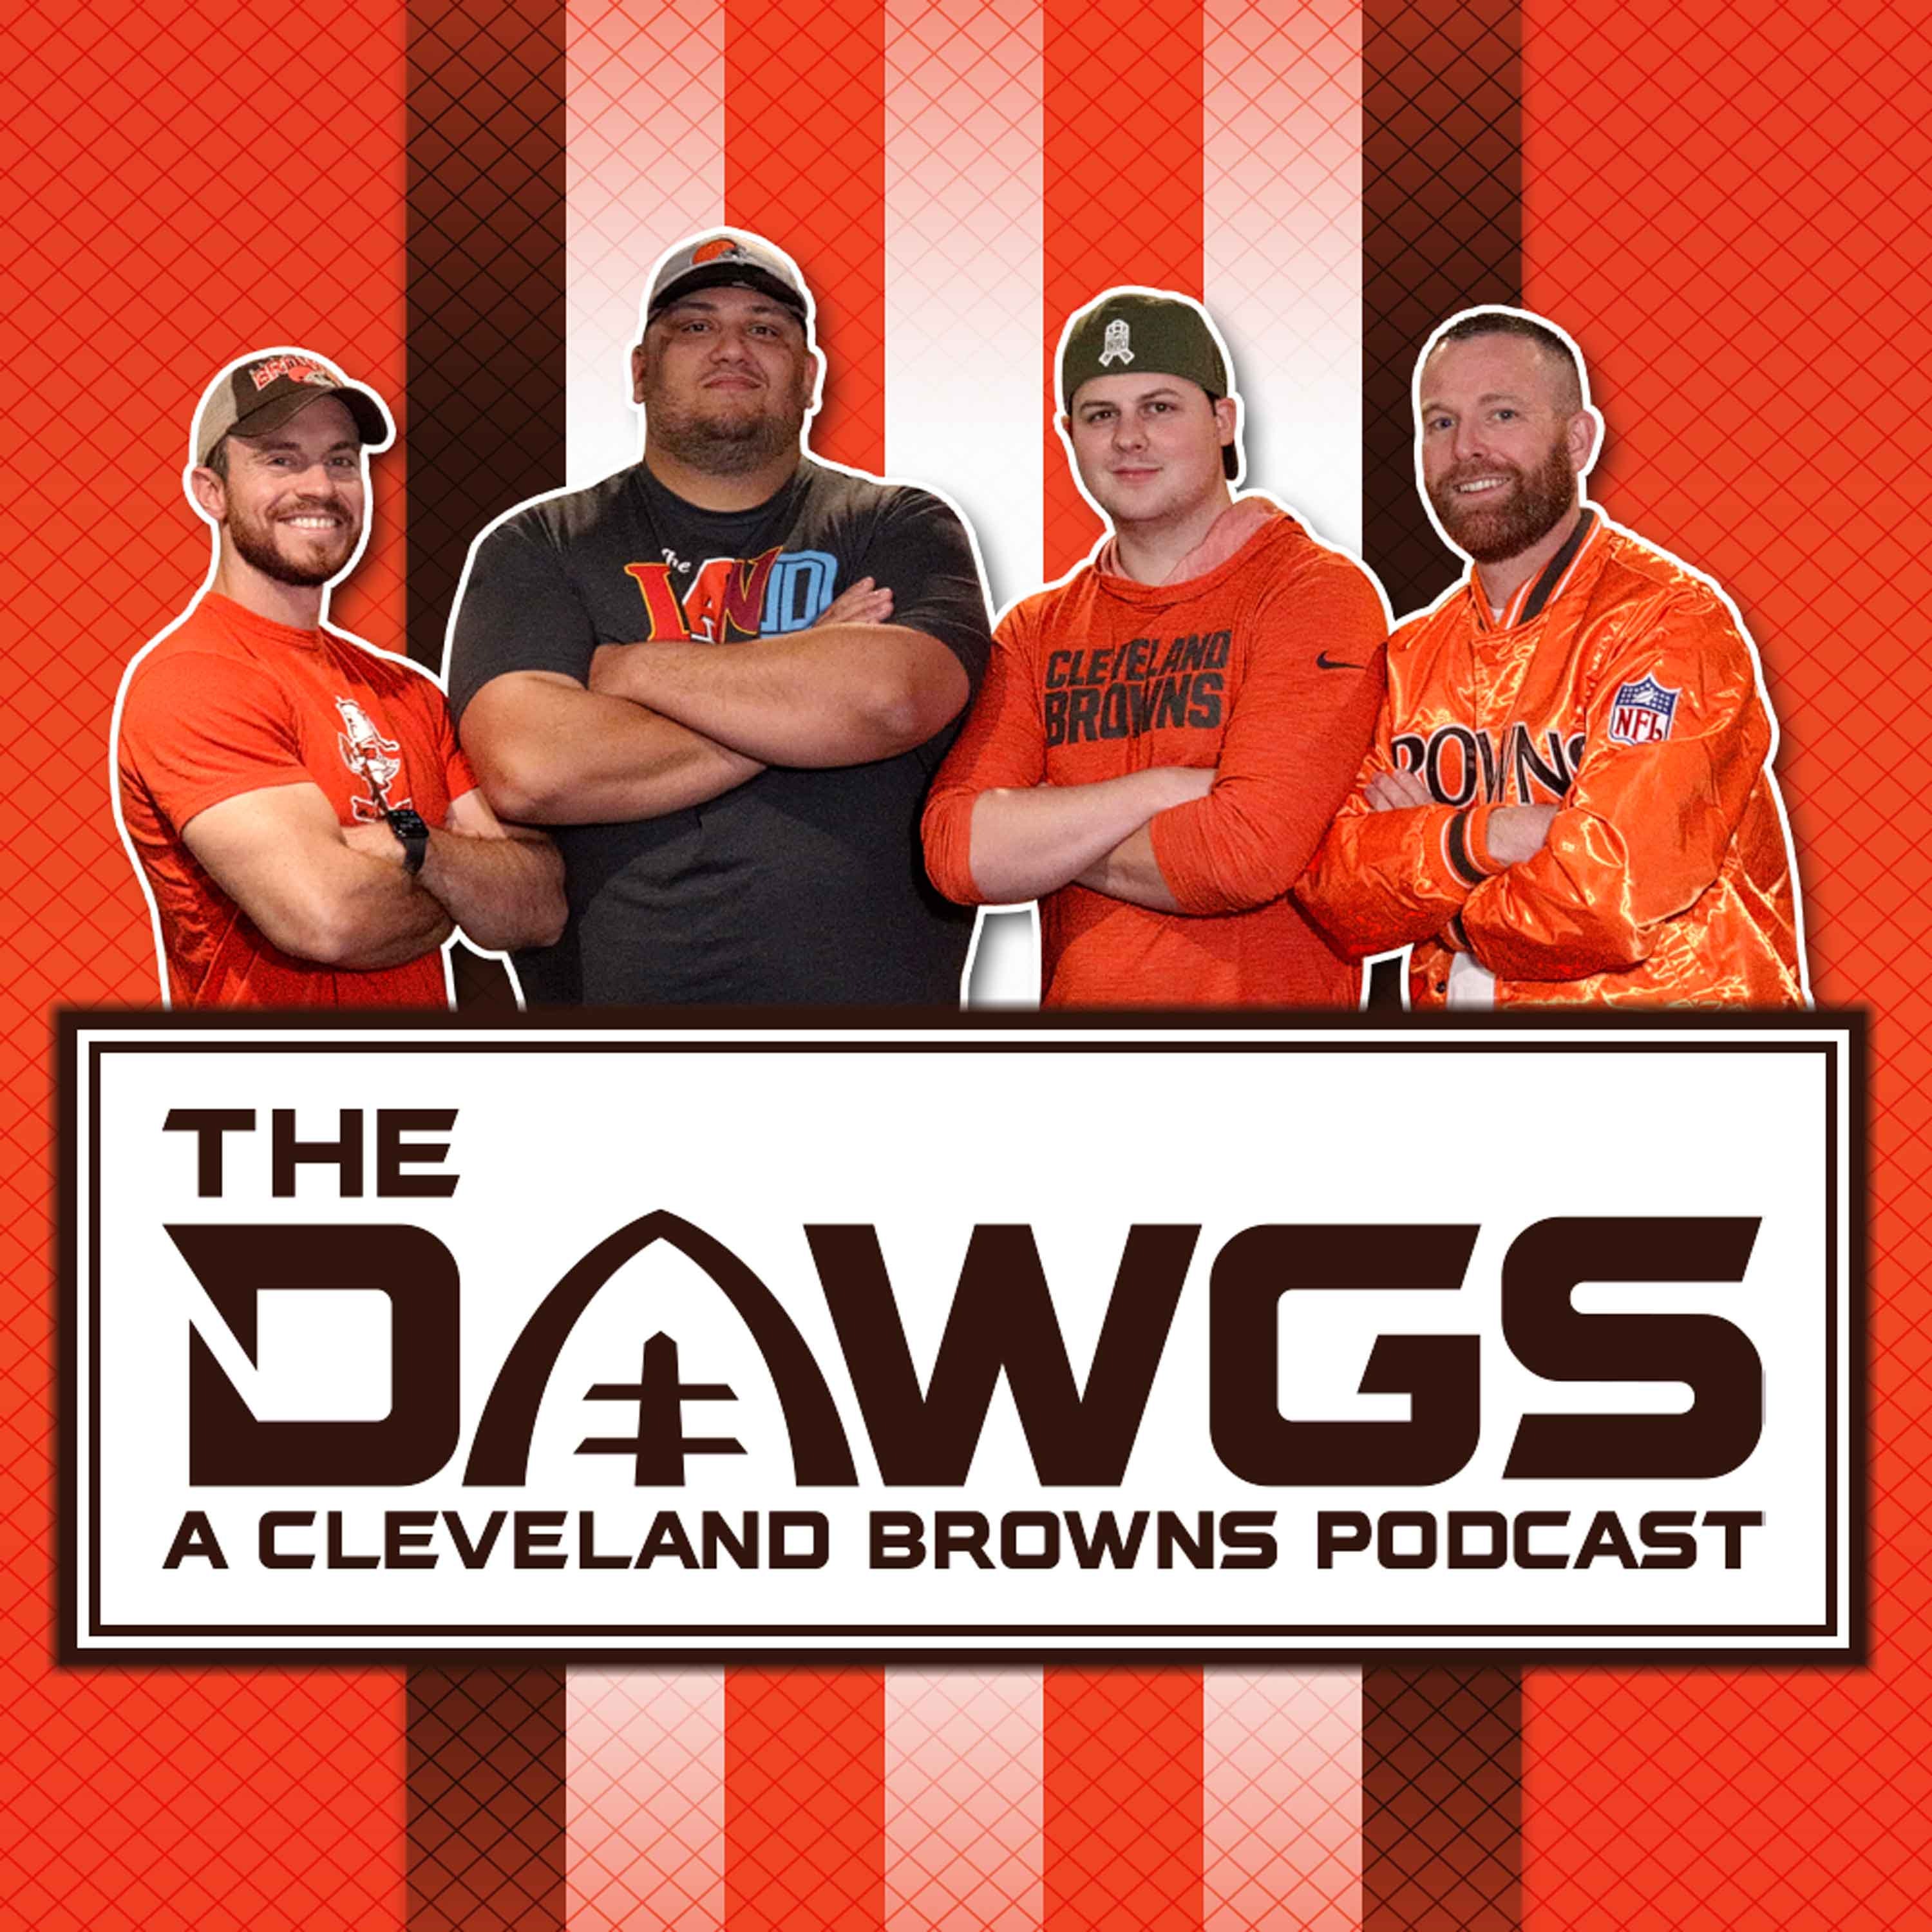 Breakouts, Sleepers and Busts for the Browns in 2022  | The Dawgs - A Cleveland Browns Podcast - June 30, 2022